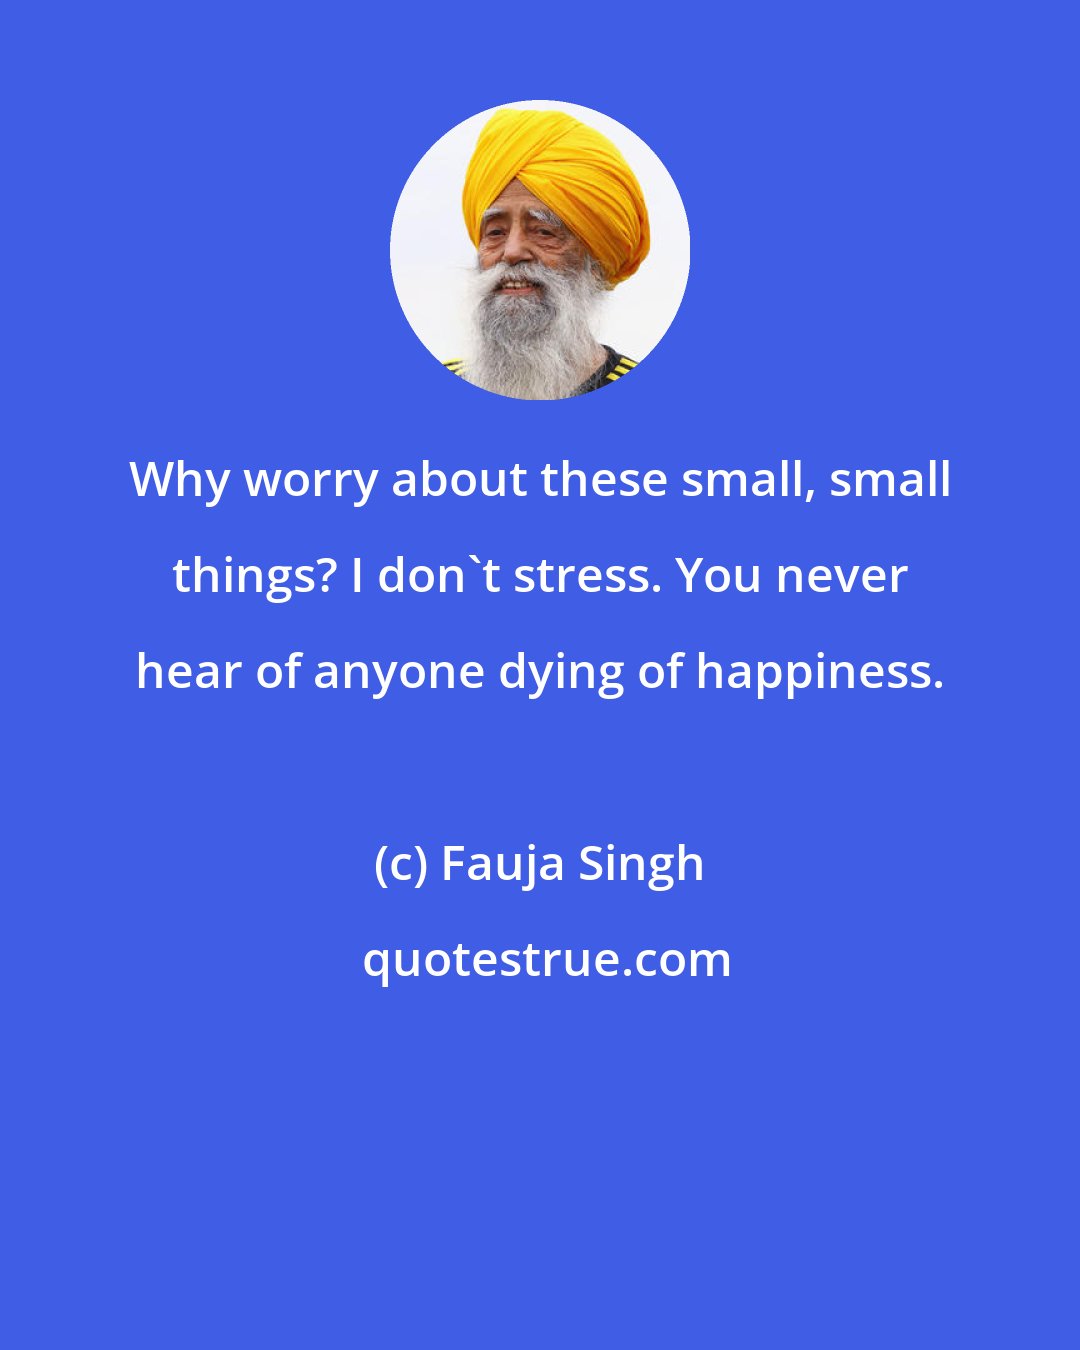 Fauja Singh: Why worry about these small, small things? I don't stress. You never hear of anyone dying of happiness.